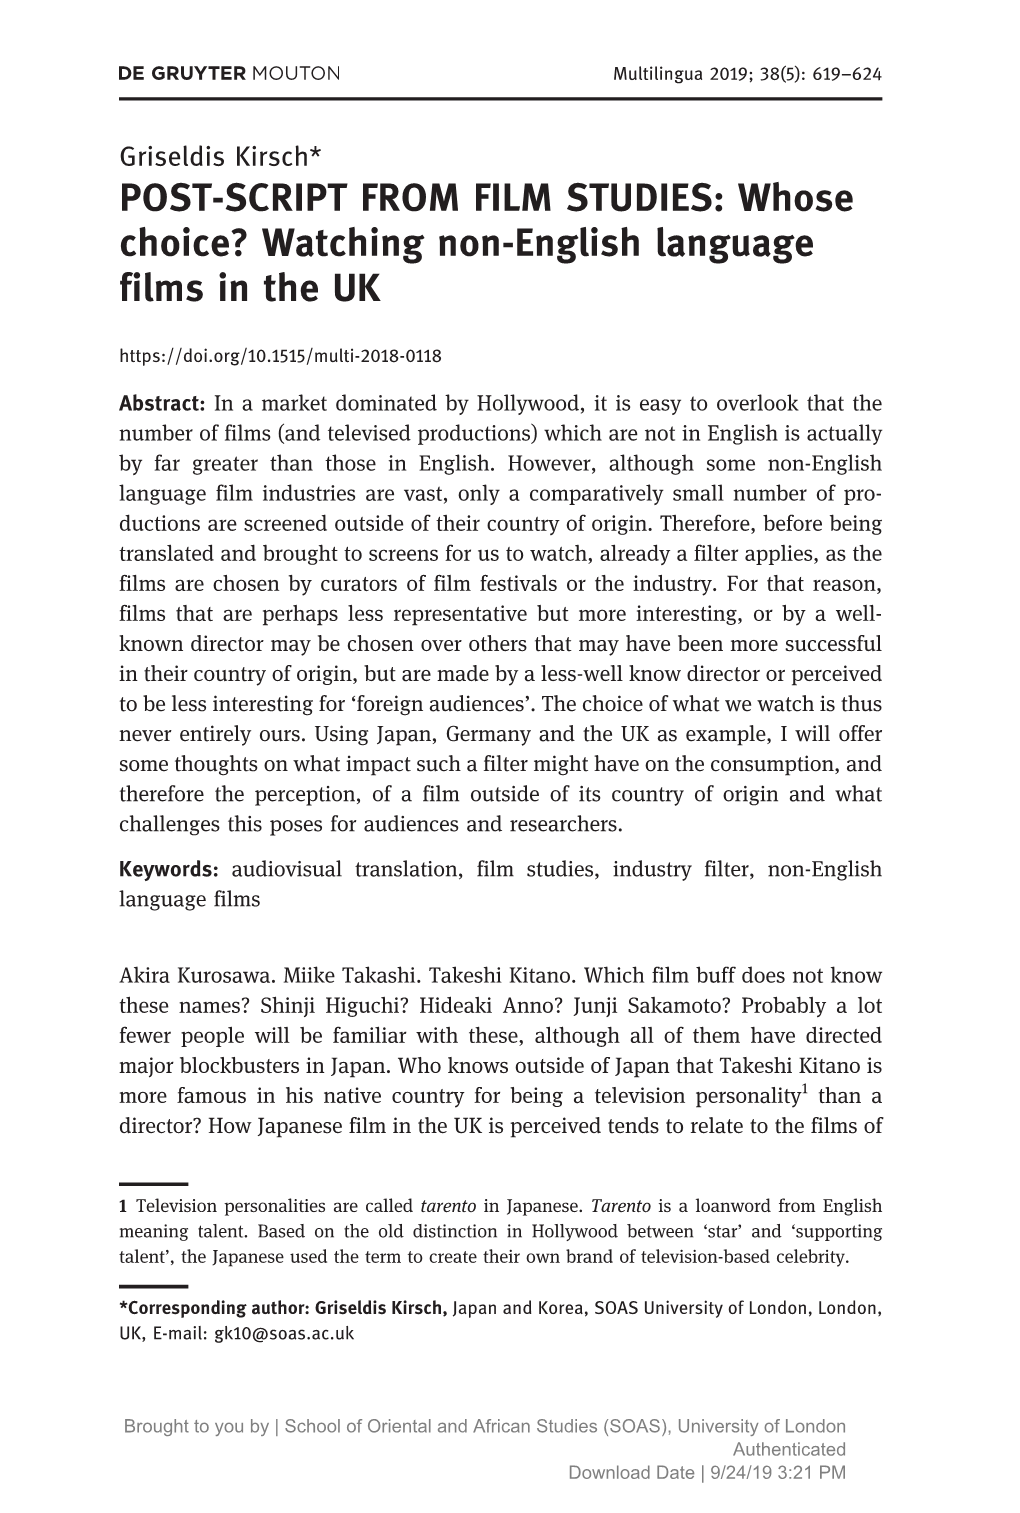 Whose Choice? Watching Non-English Language Films in the UK